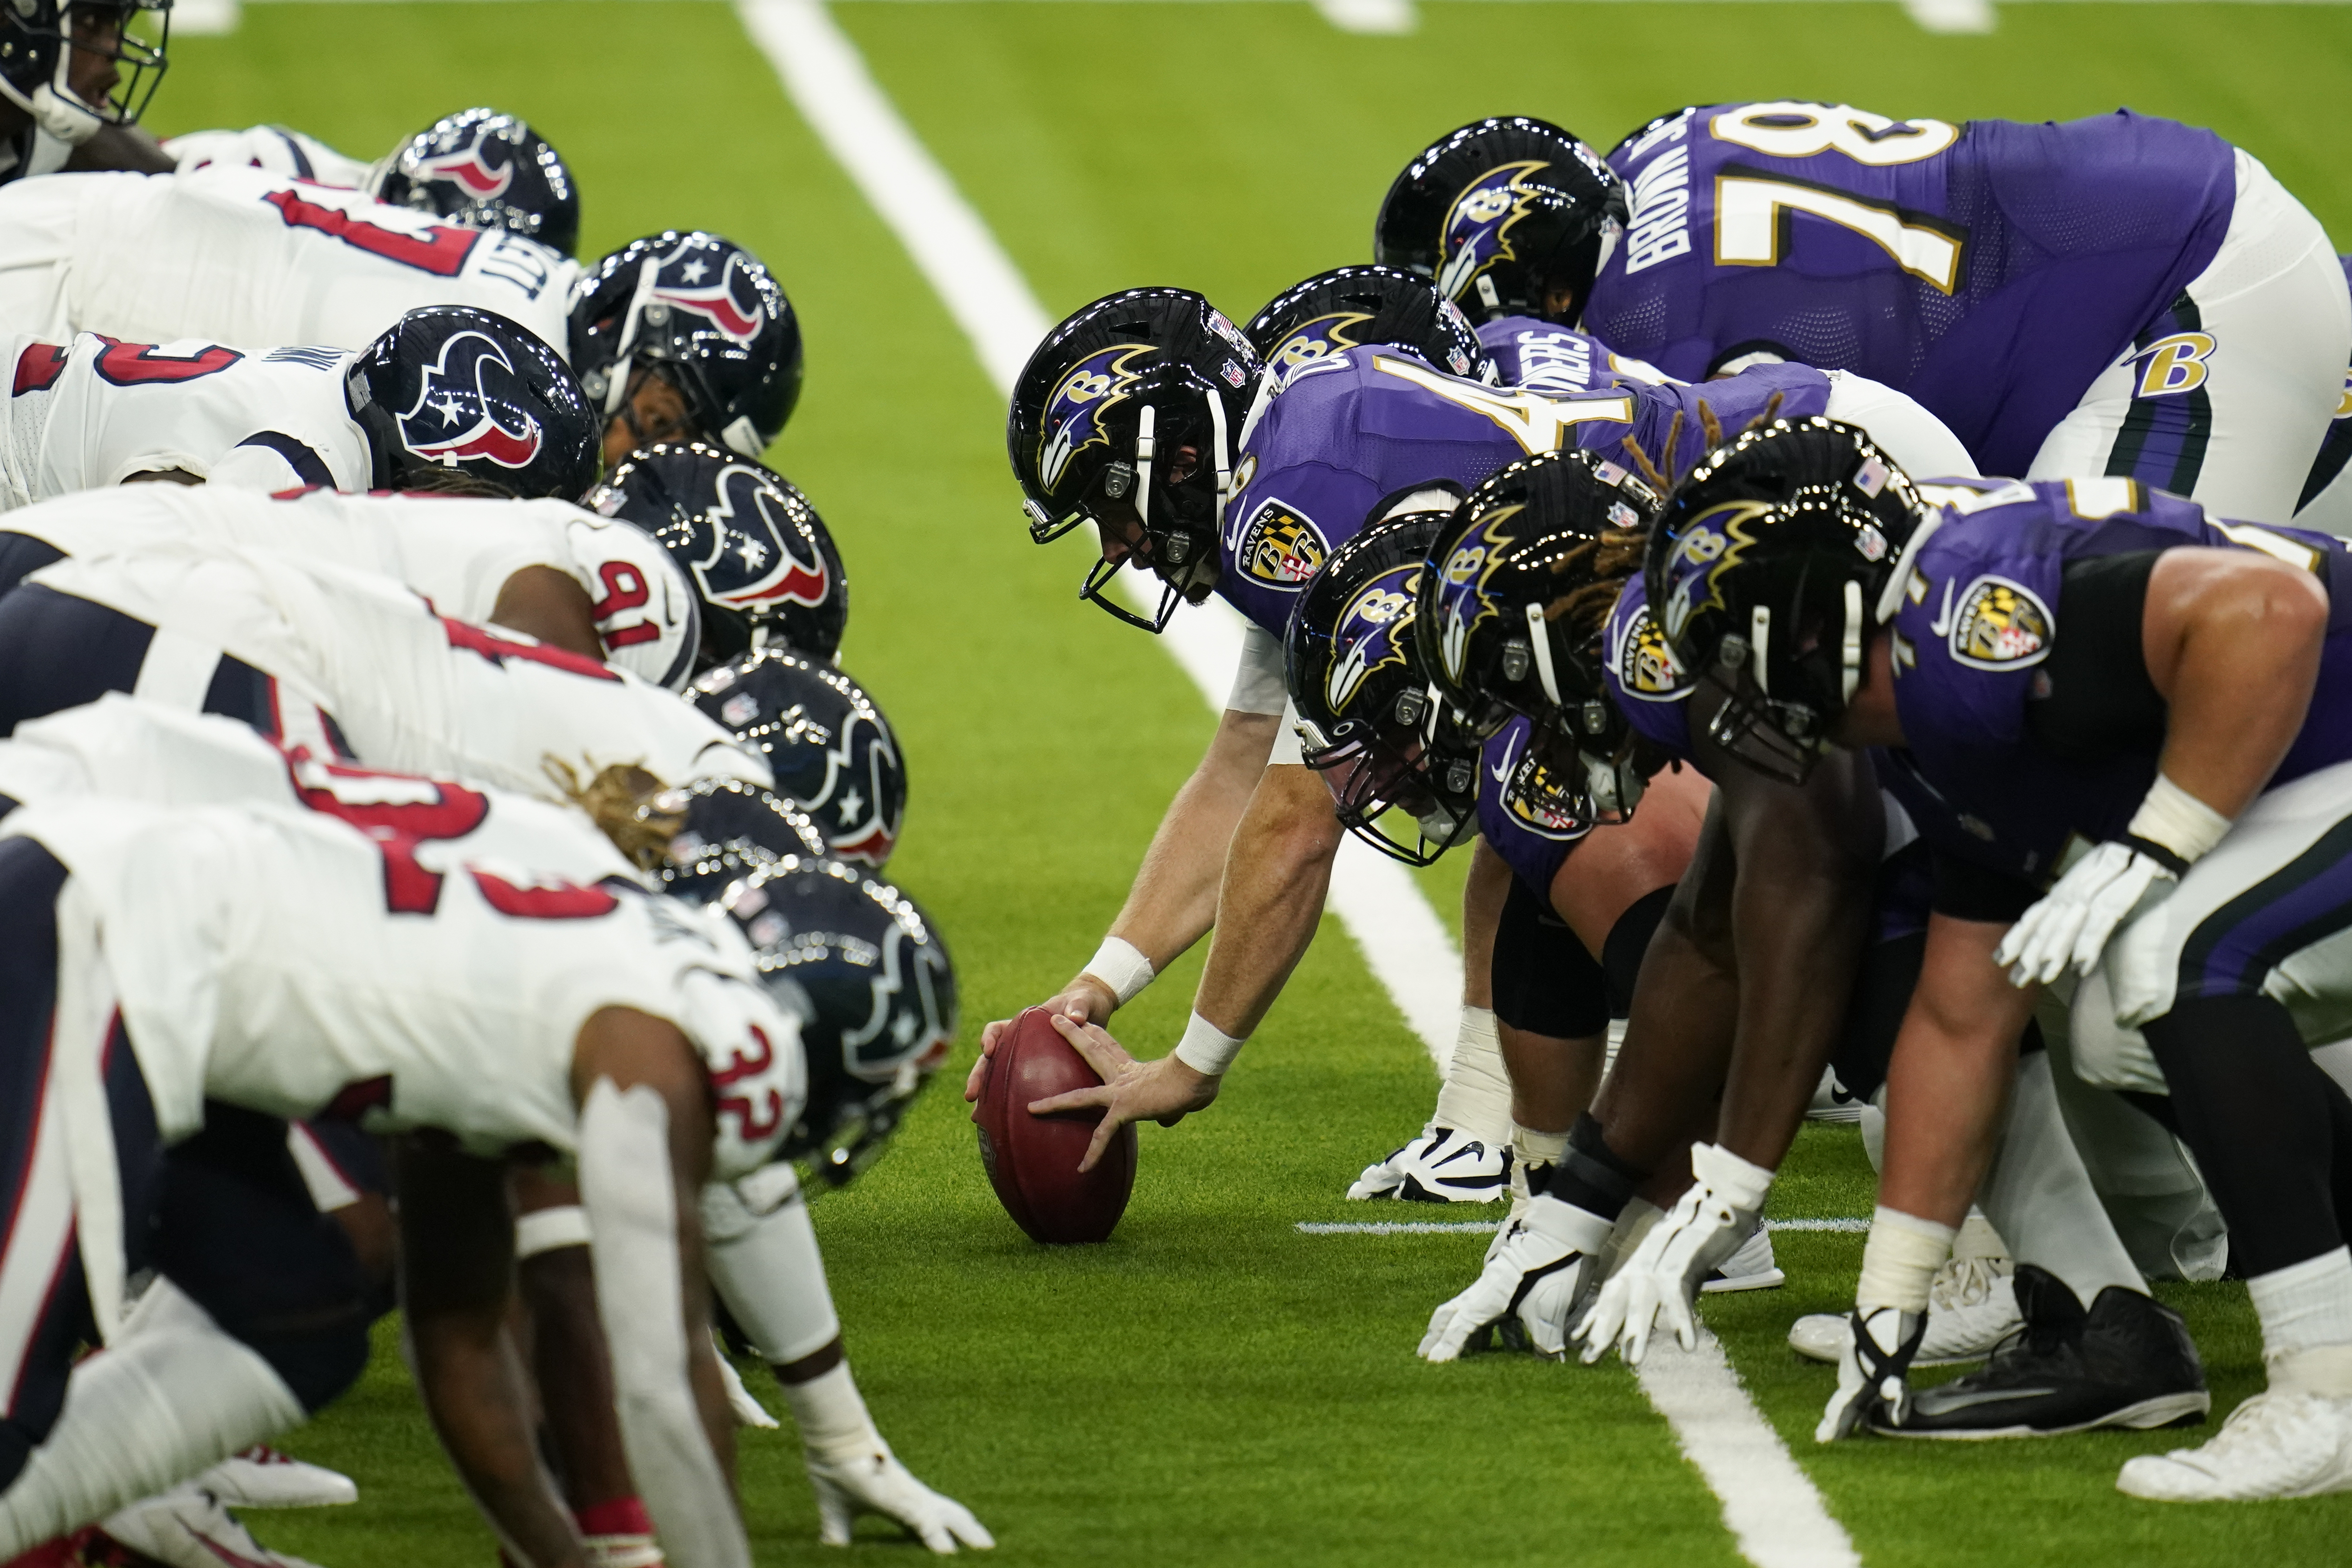 Ravens vs. Texans scouting report for Week 1: Who has the edge?